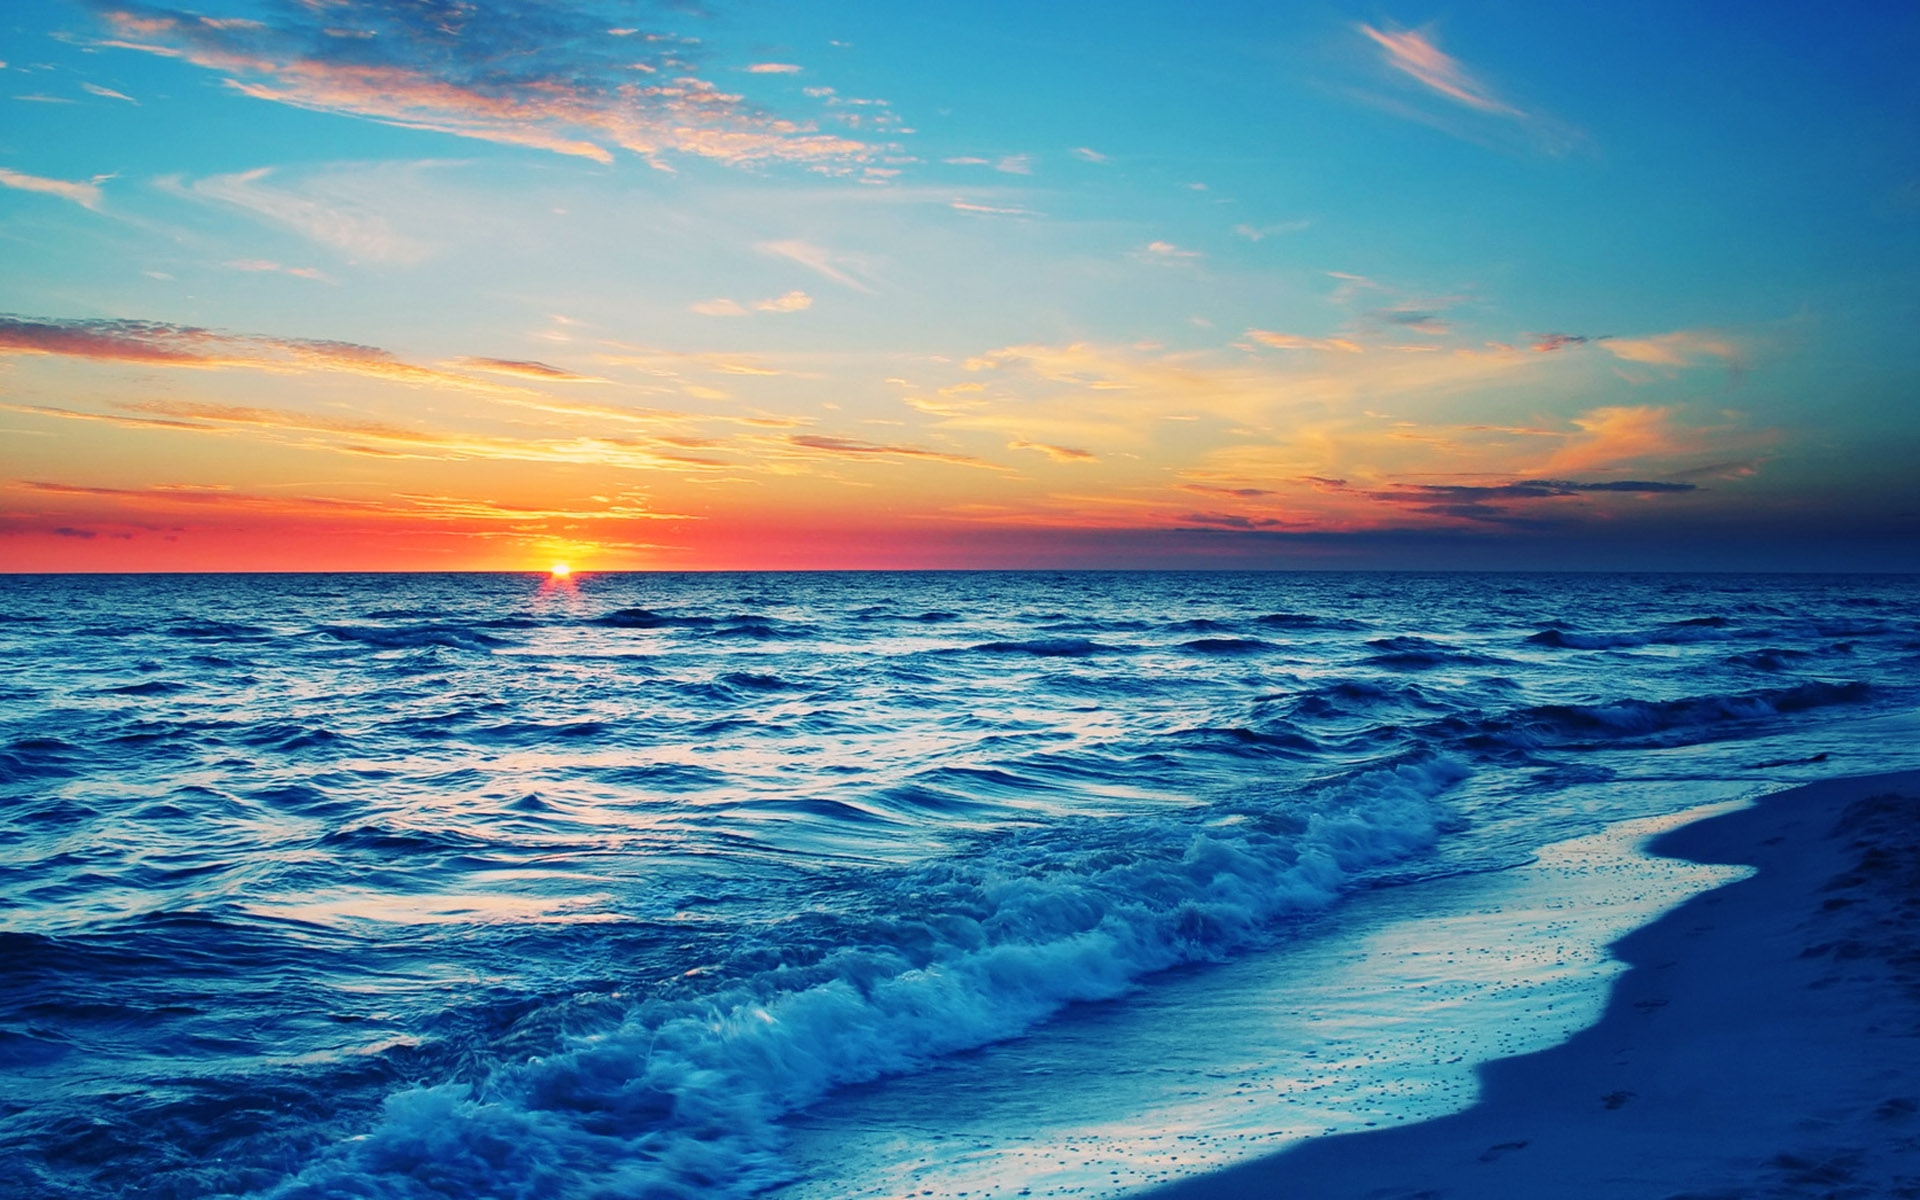 50 AMAZING BEACH WALLPAPERS FREE TO DOWNLOAD